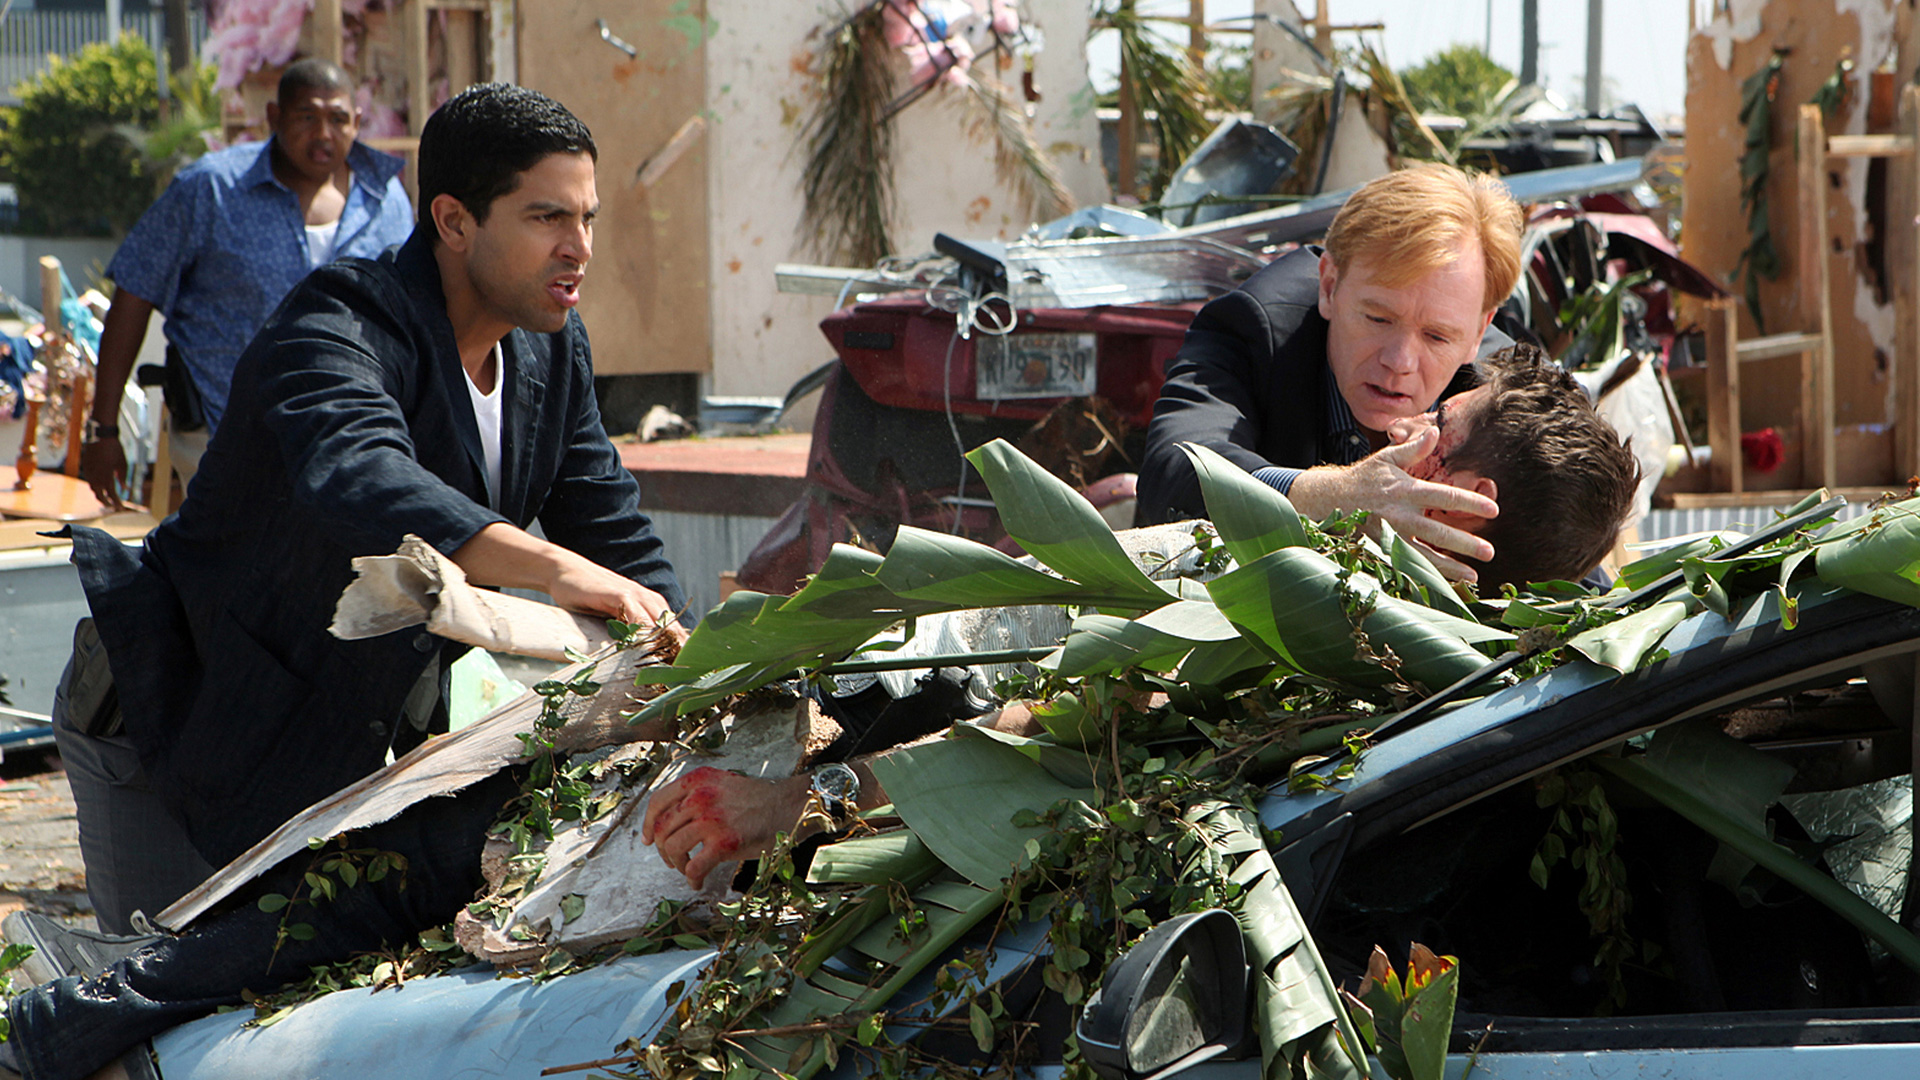 CBS announces surprise new CSI: Miami series as part of summer line-up after cancellation of Vegas spinoff show [Video]